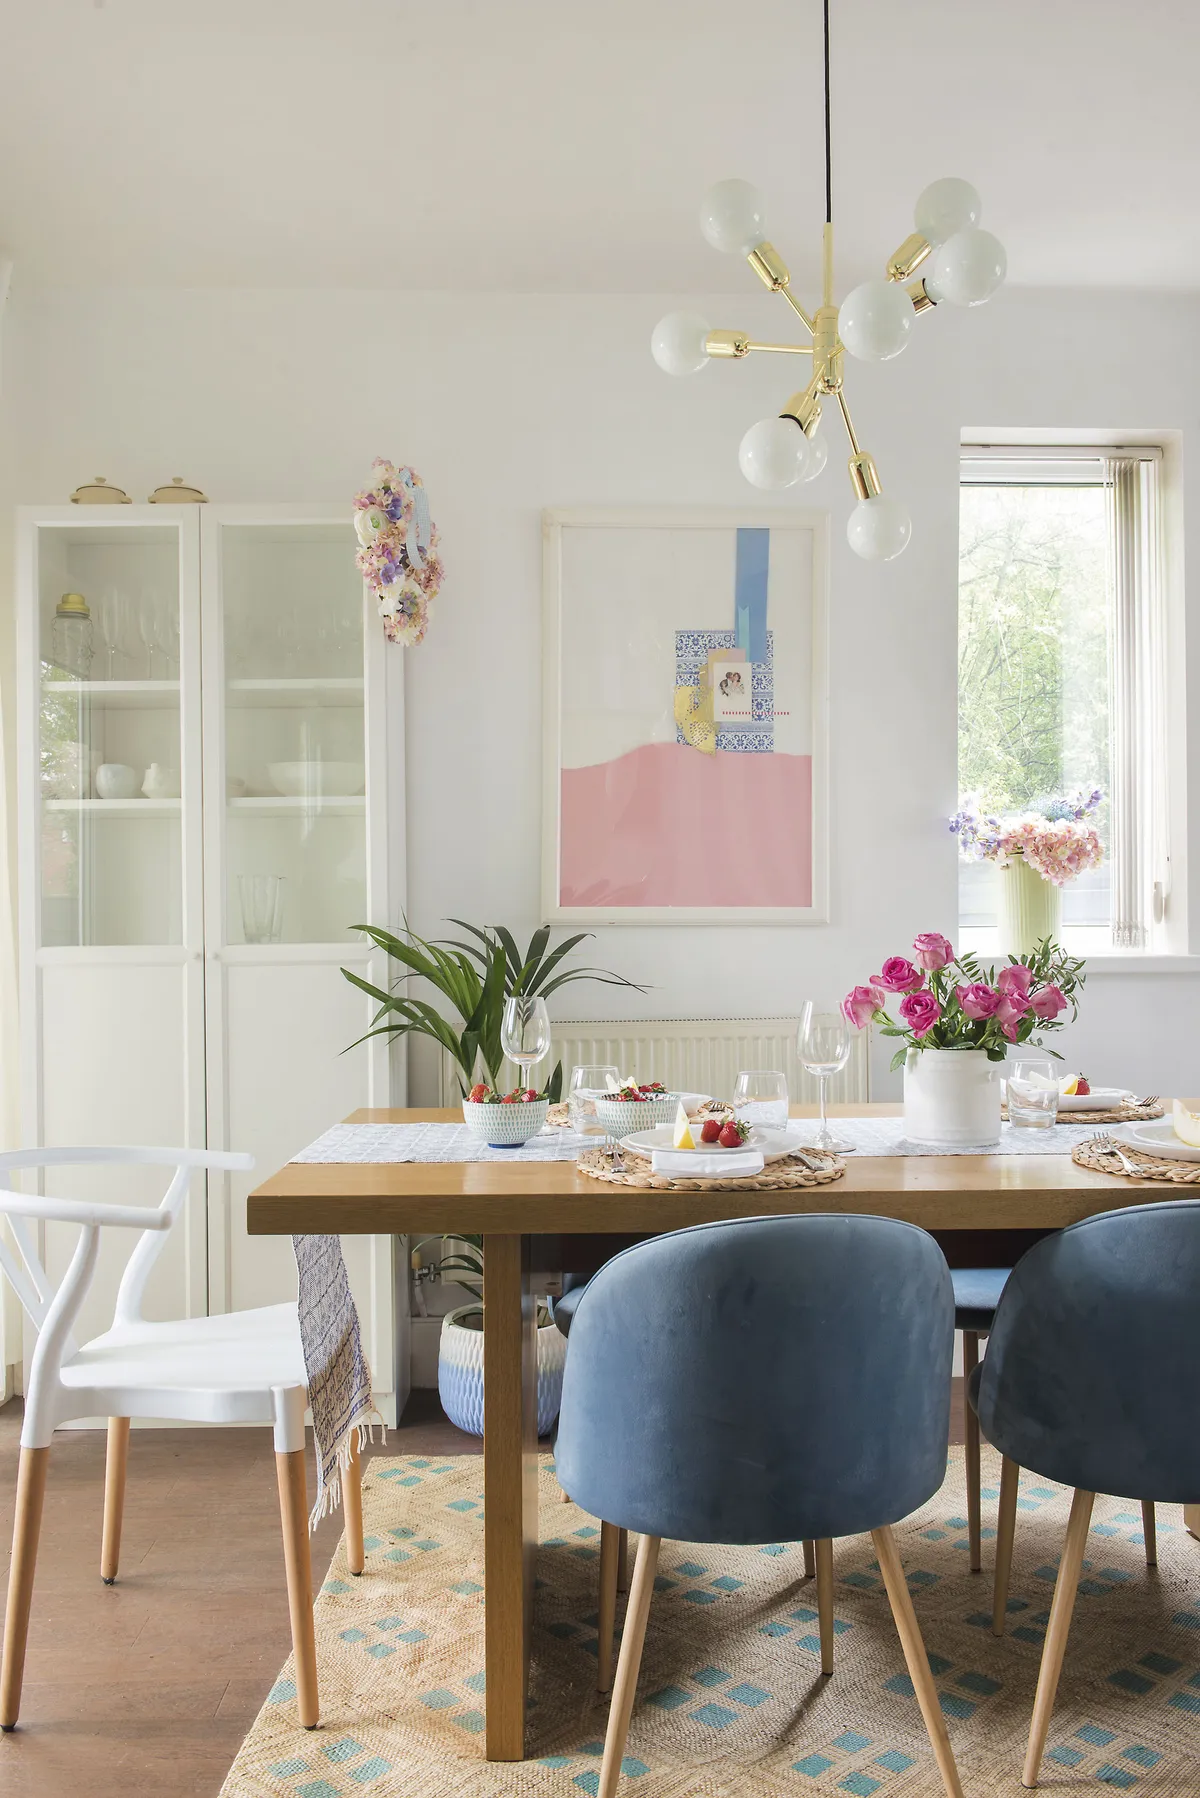 Beam wanted to bring the pinks of the living room into the dining area. She’s dressed the dining table with a handwoven table runner and placemats from her home country, the Philippines. A glass-fronted Billy bookcase from IKEA is used to store the couple’s glassware and spare kitchen bits